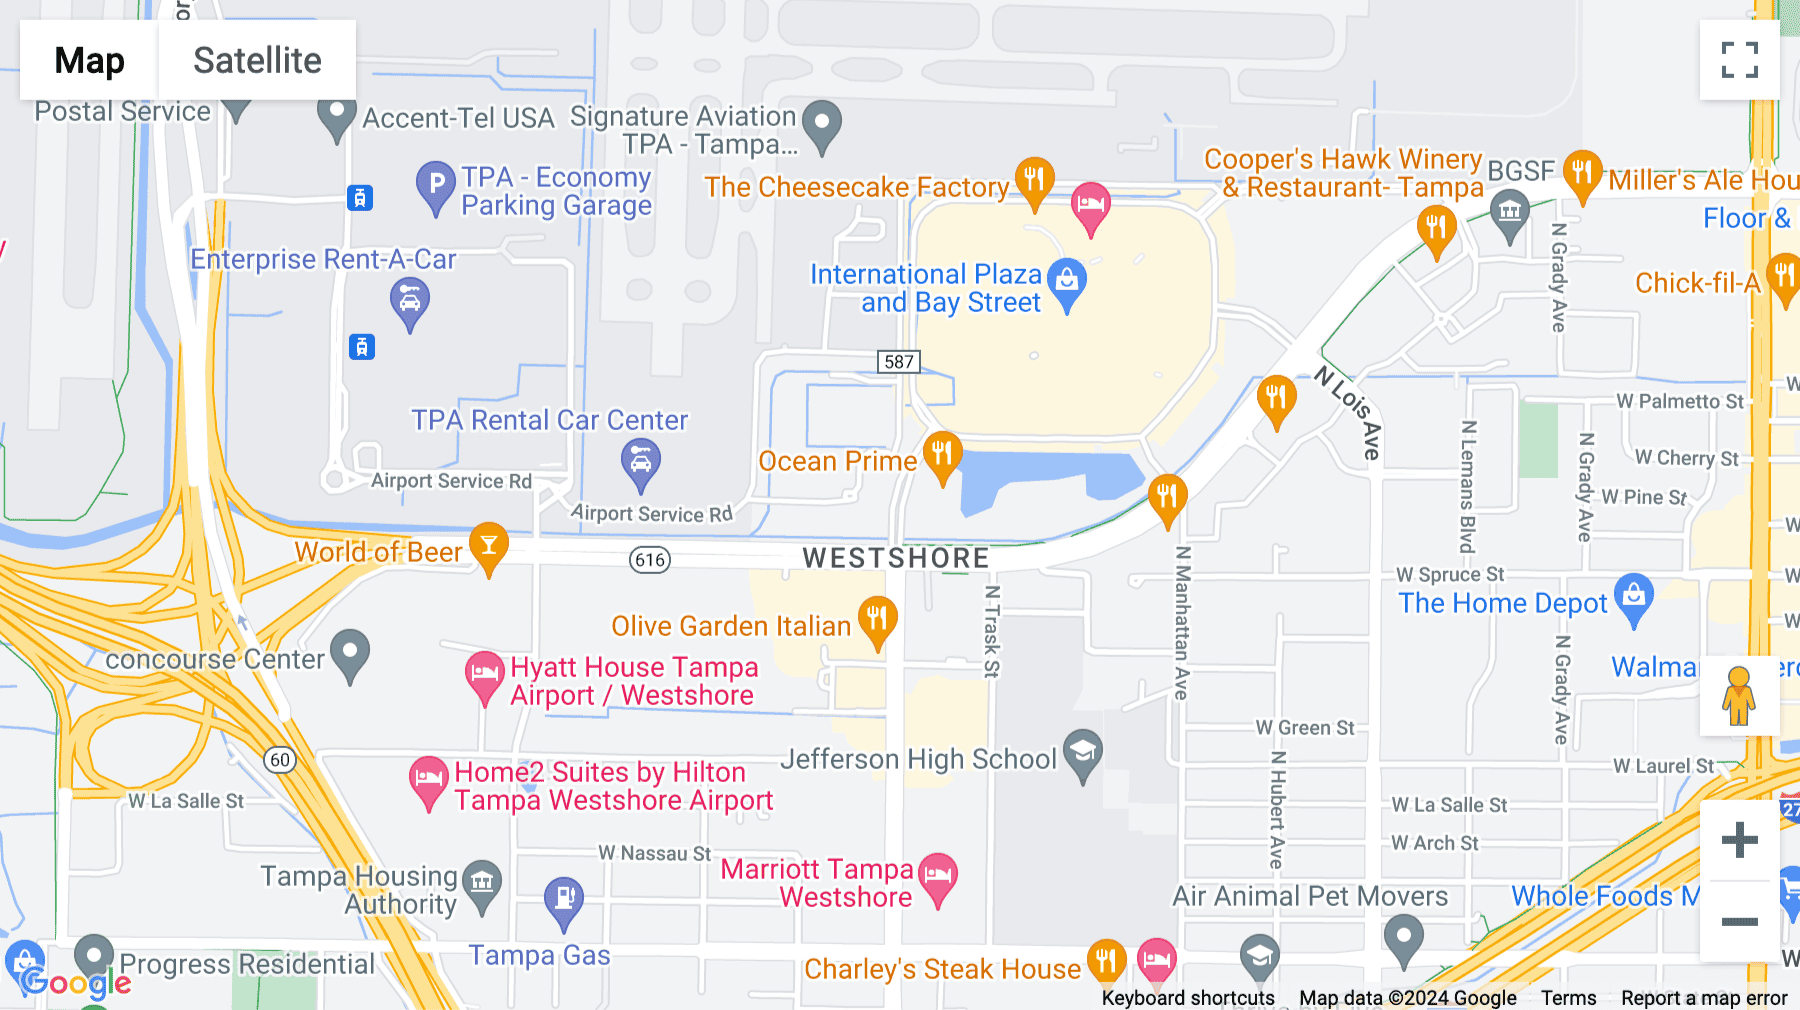 Click for interative map of 2202 N. West Shore Blvd., Suite 200, Westshore Center, Tampa